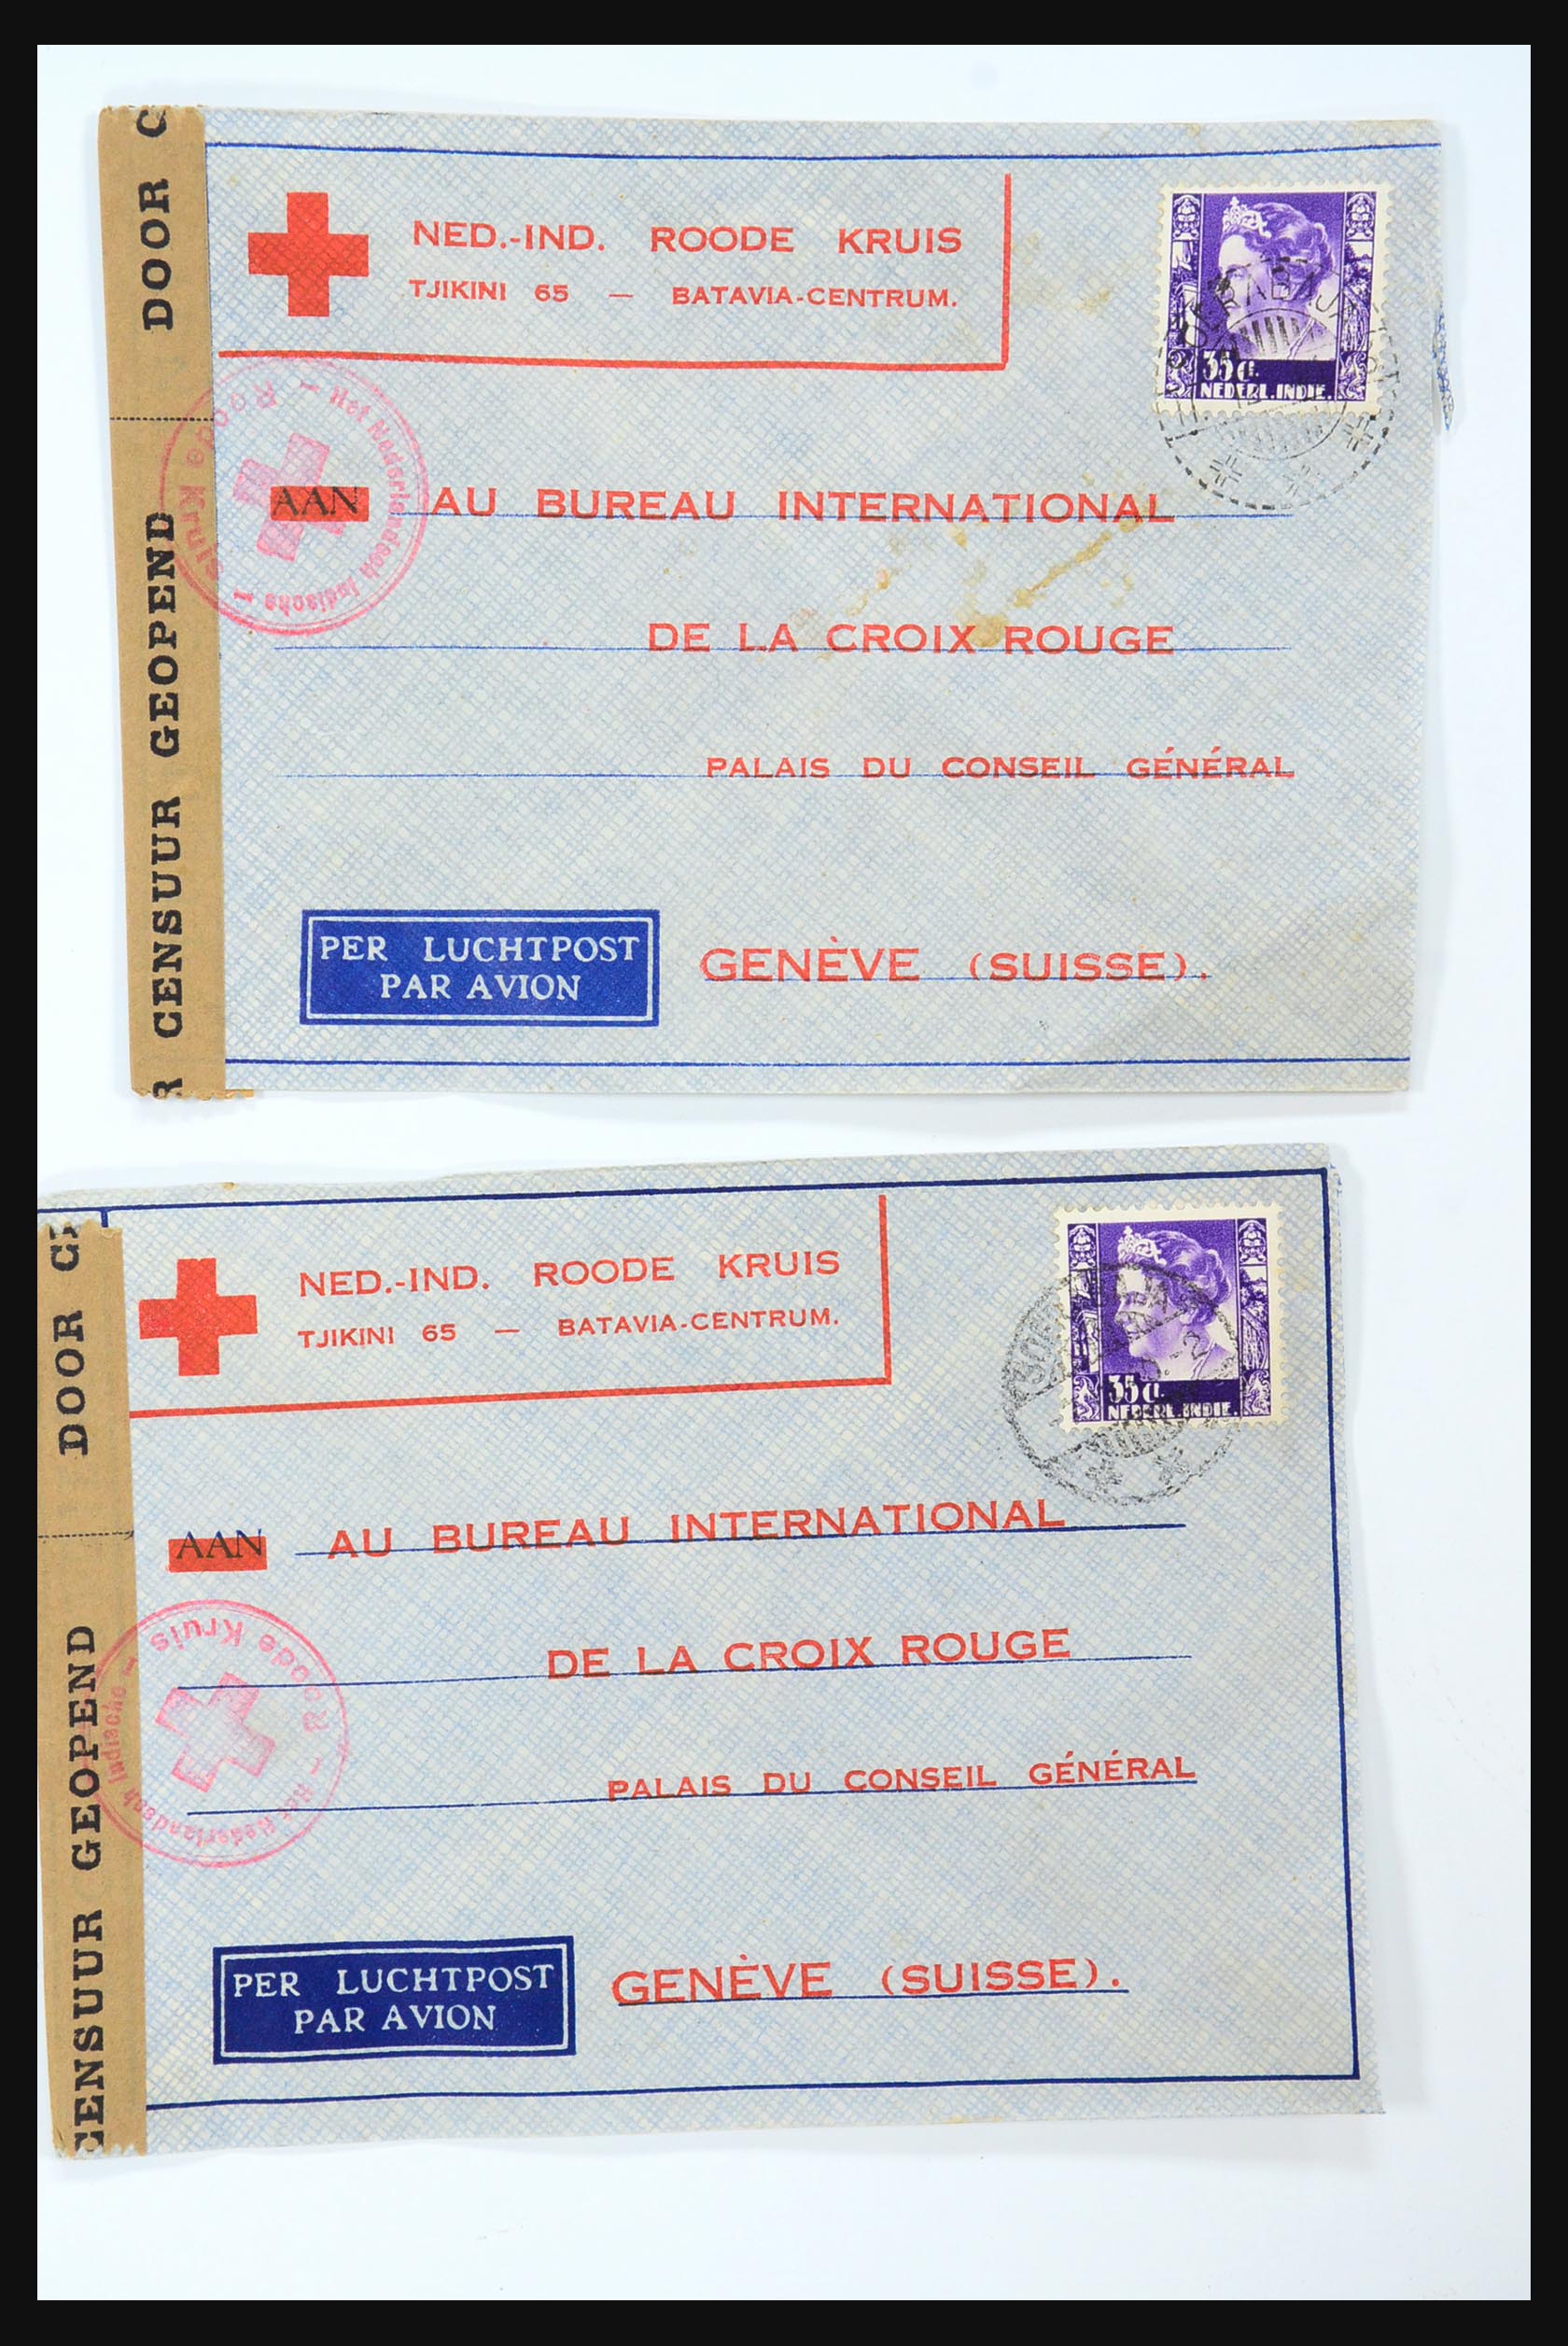 31362 087 - 31362 Netherlands Indies Japanese occupation covers 1942-1945.